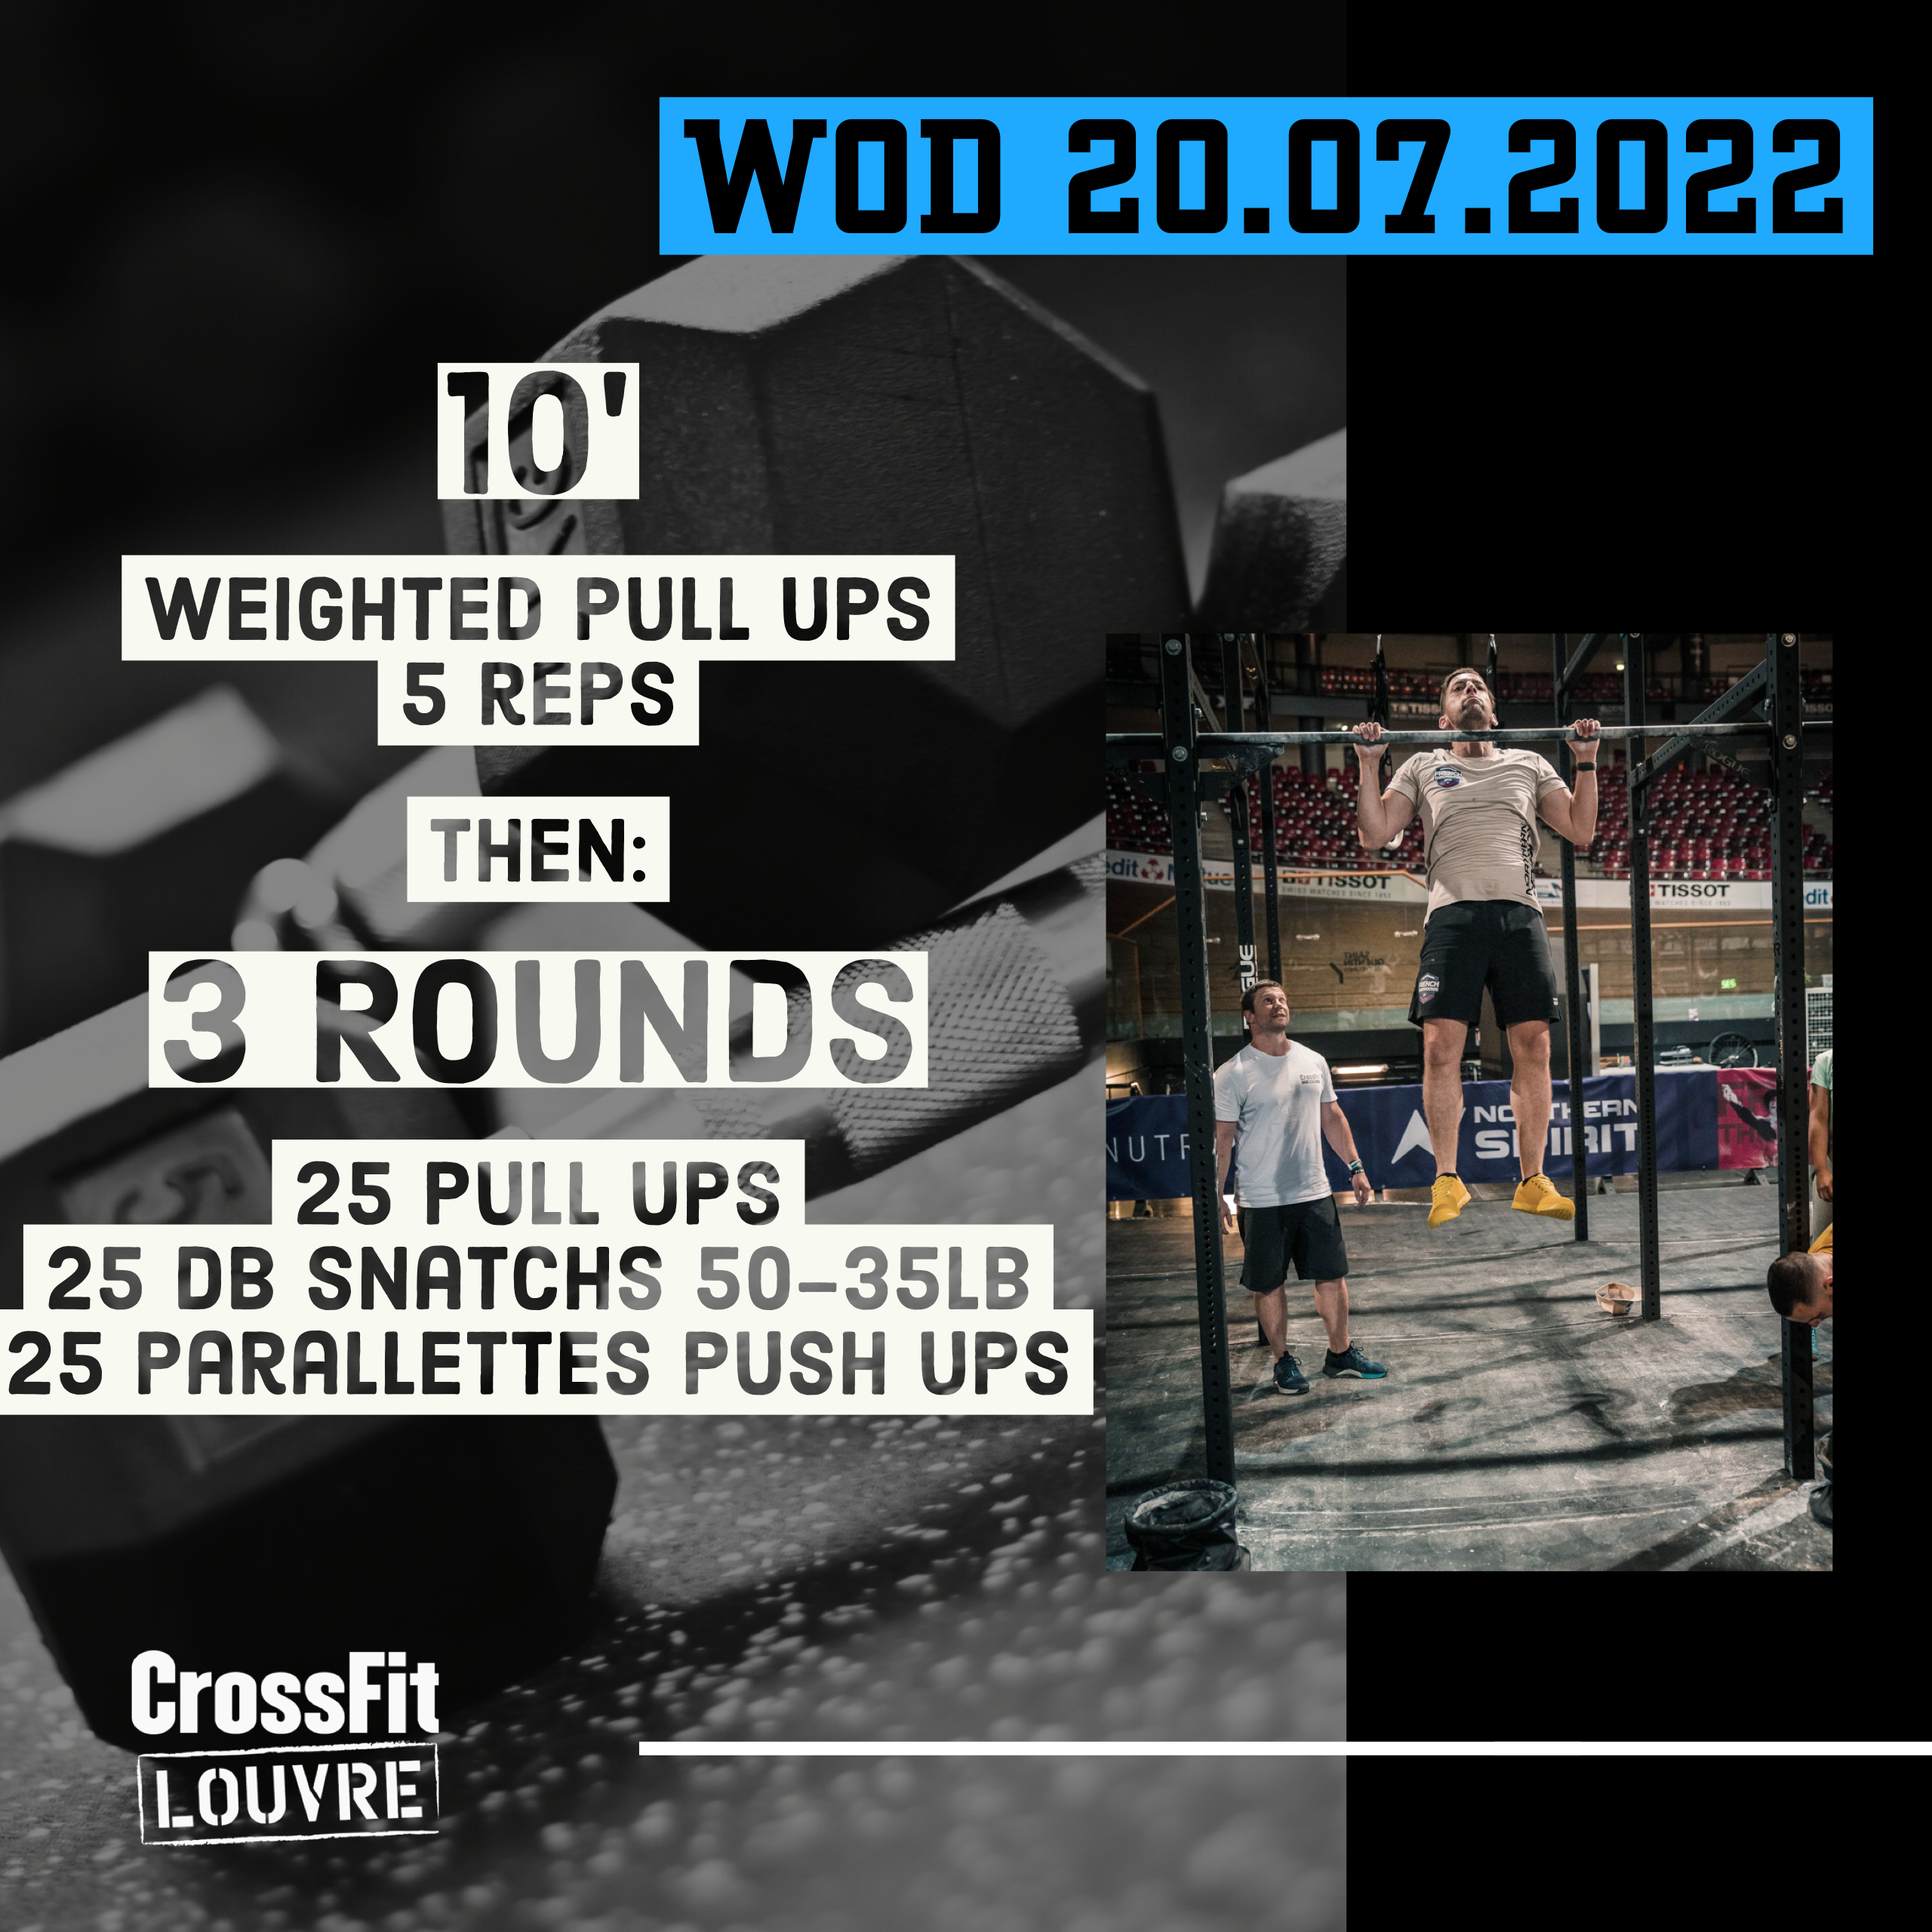 Weighted Pull Up Pull Up DB Snatch Parallette Push Up